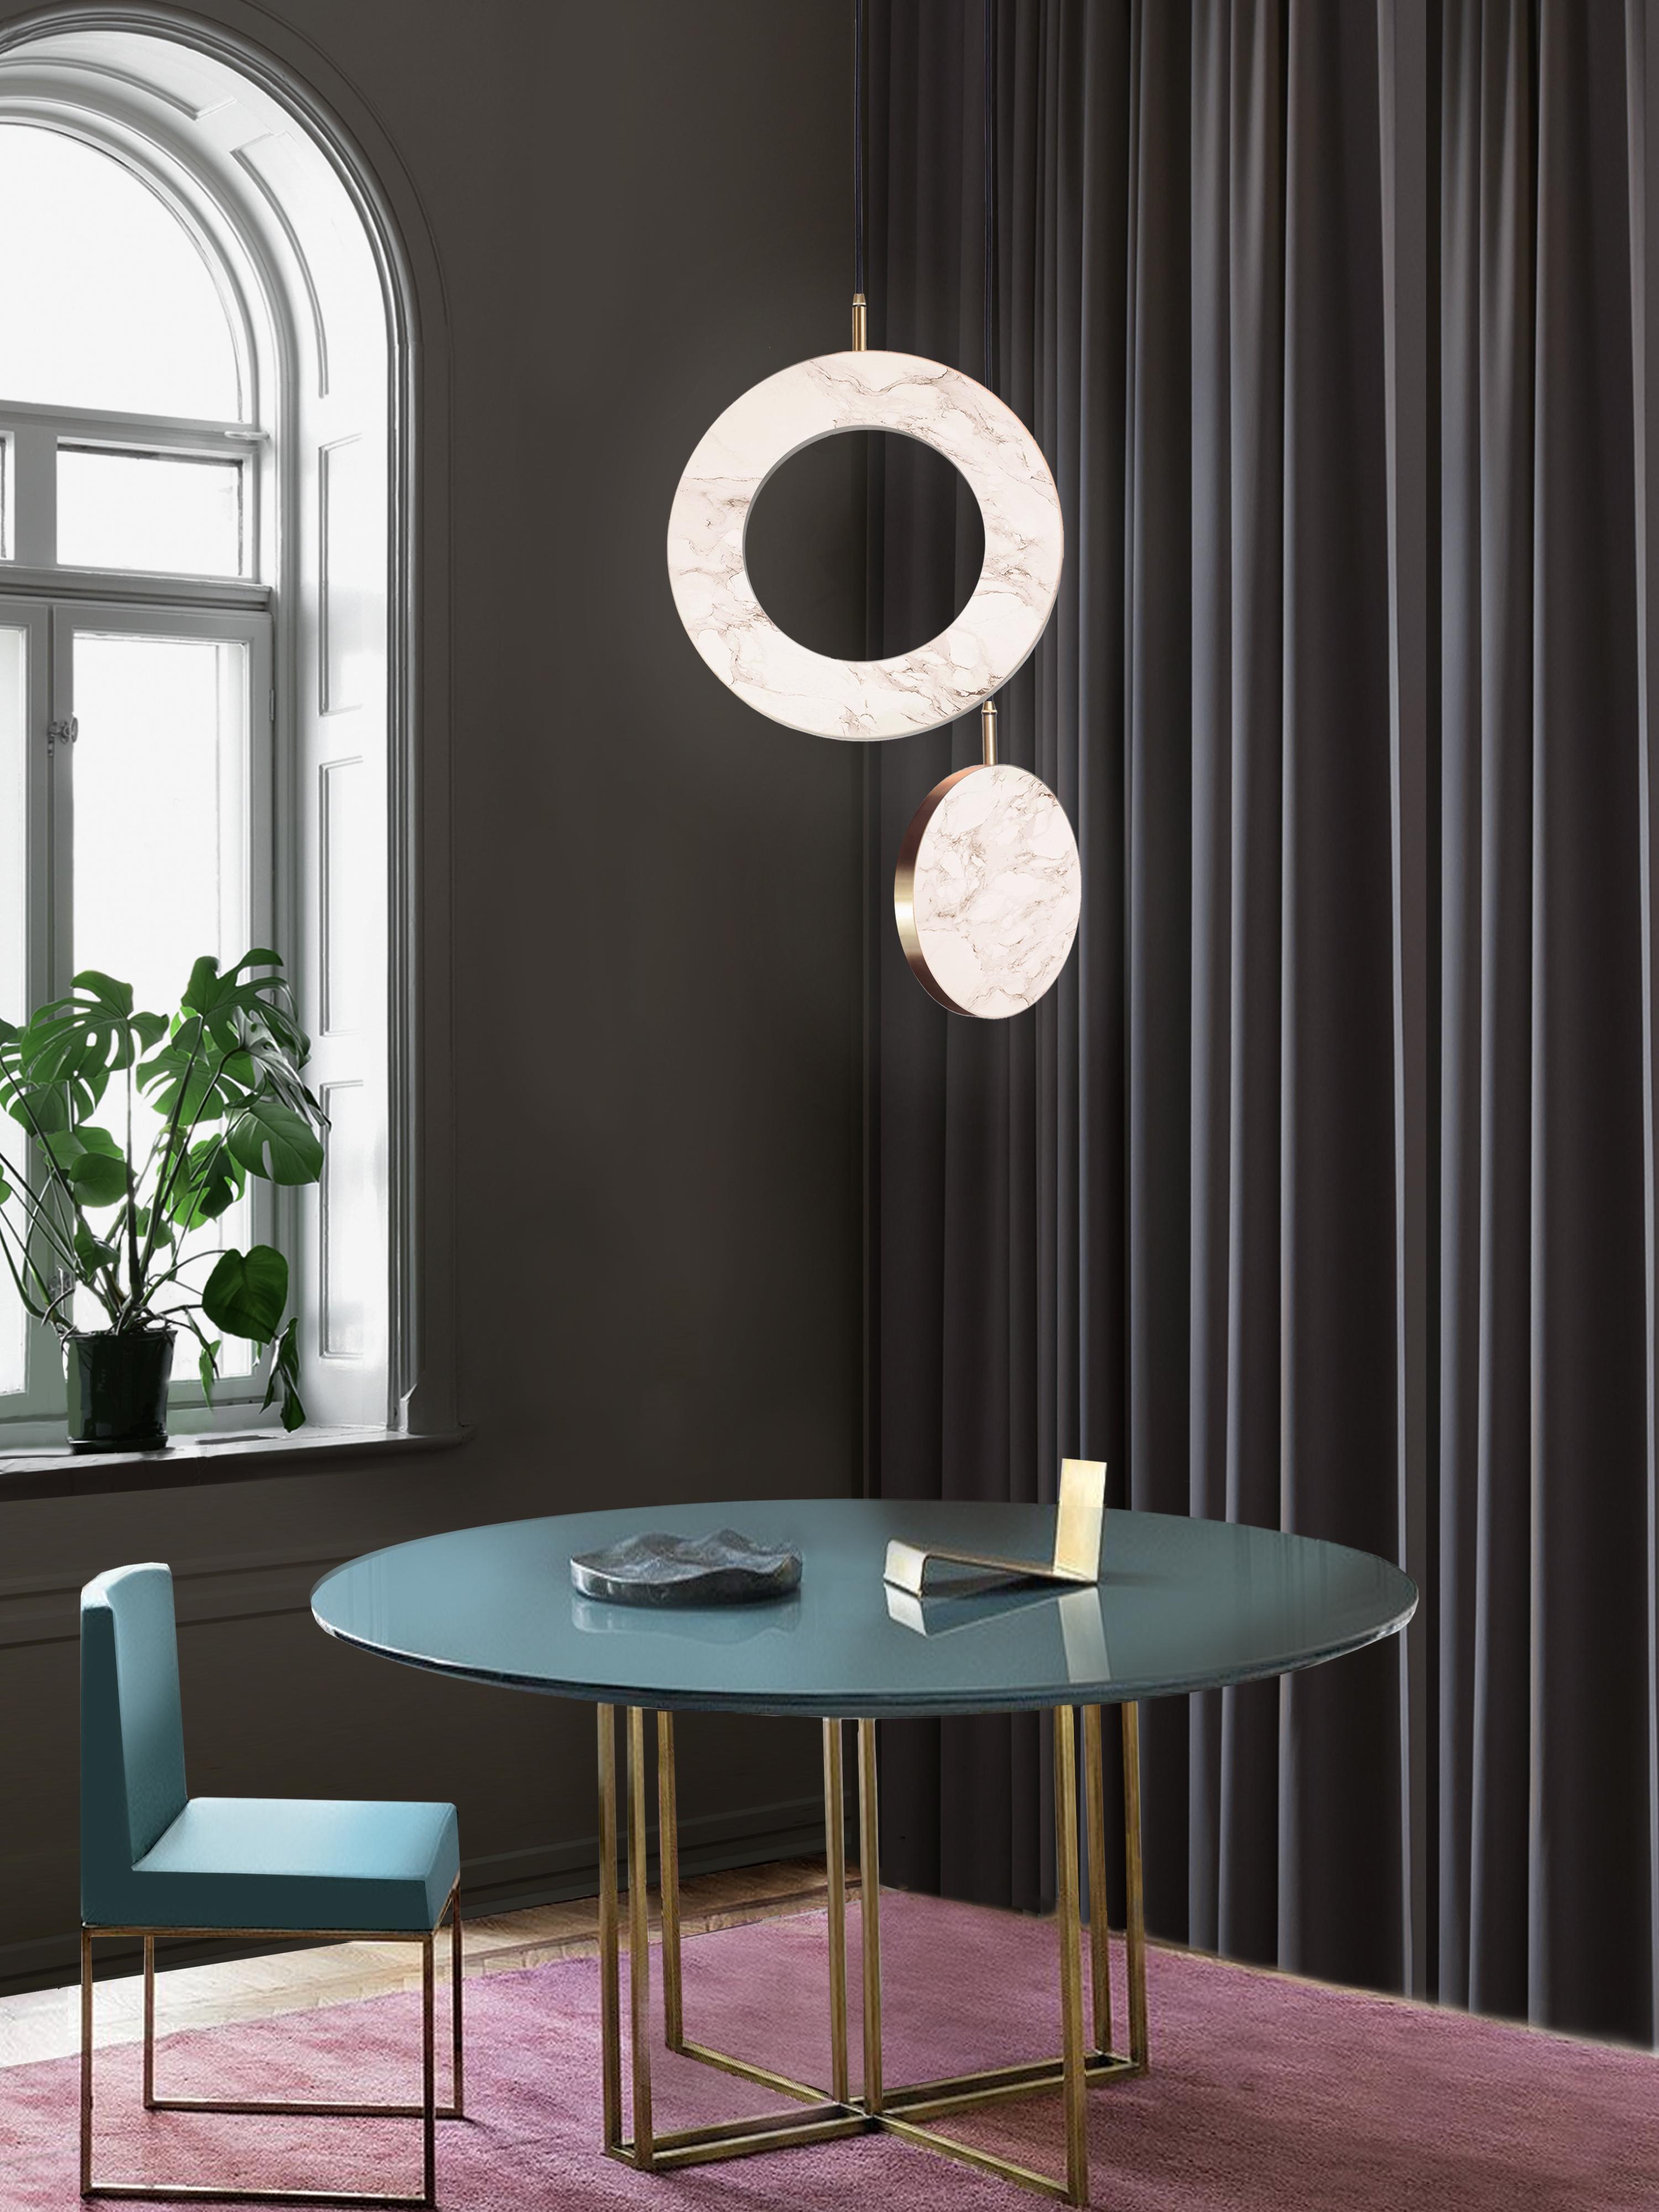 The Rosa Rings collection was designed to showcase the opaque beauty of natural marble. The pendant incorporates a backlit Rosa Estremoz marble disc that emits a soft, warm illumination, pierced by the natural veining of the stone.

Integrated